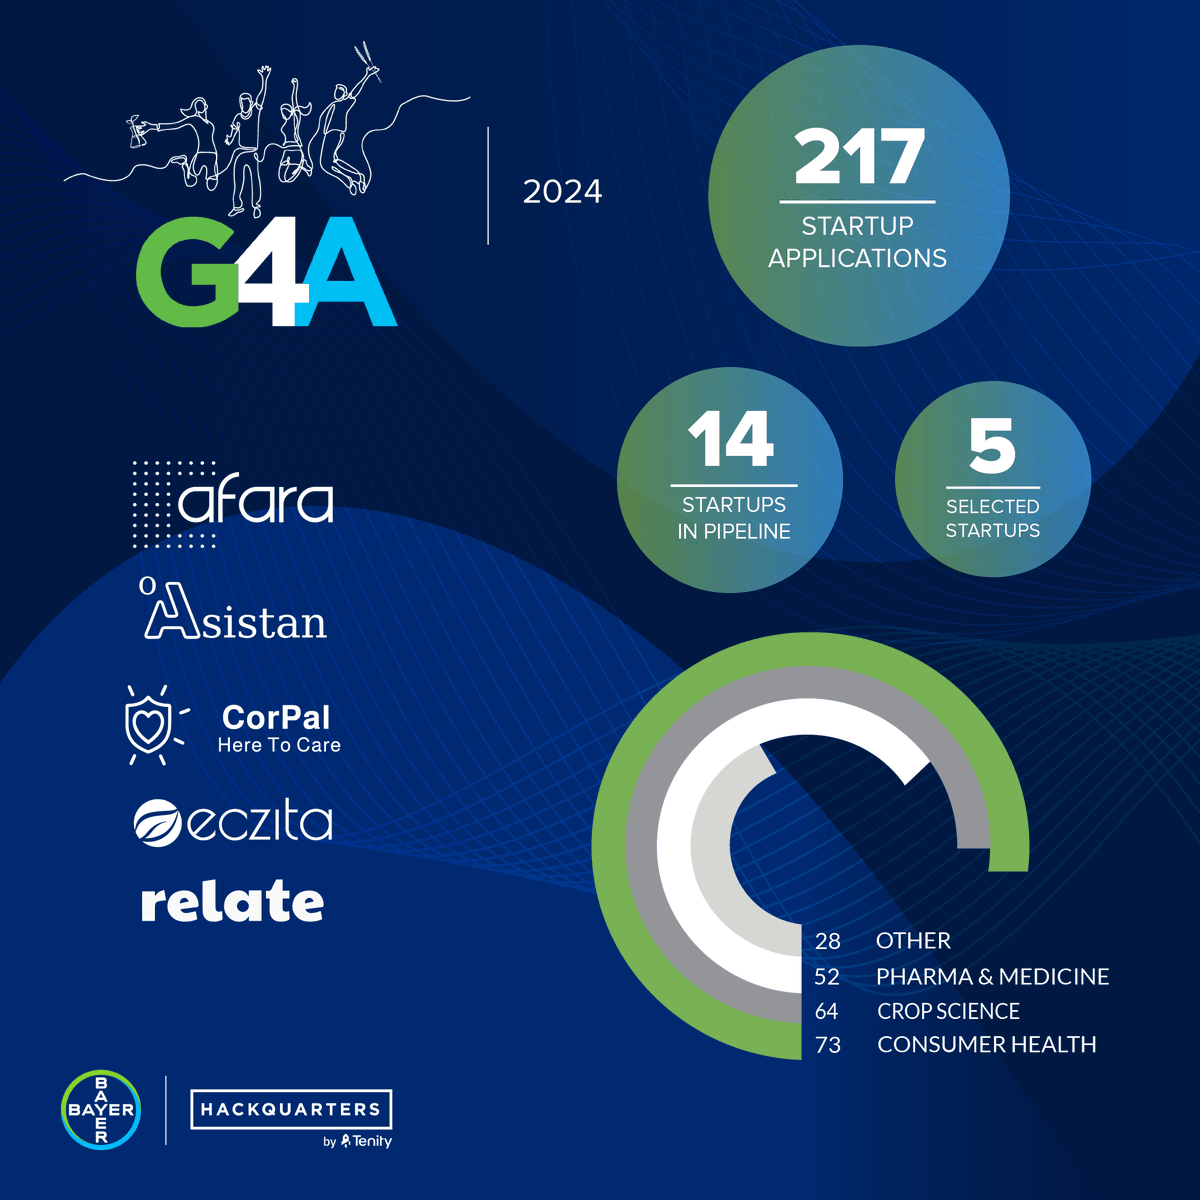 The Bayer G4A 2024 Program has officially kicked off! 🌱 This year, after sifting through 217 innovative ideas from visionary entrepreneurs, we're thrilled to introduce 5 standout startups set to revolutionize #consumerhealth, #cropscience, and #pharmaceuticals.